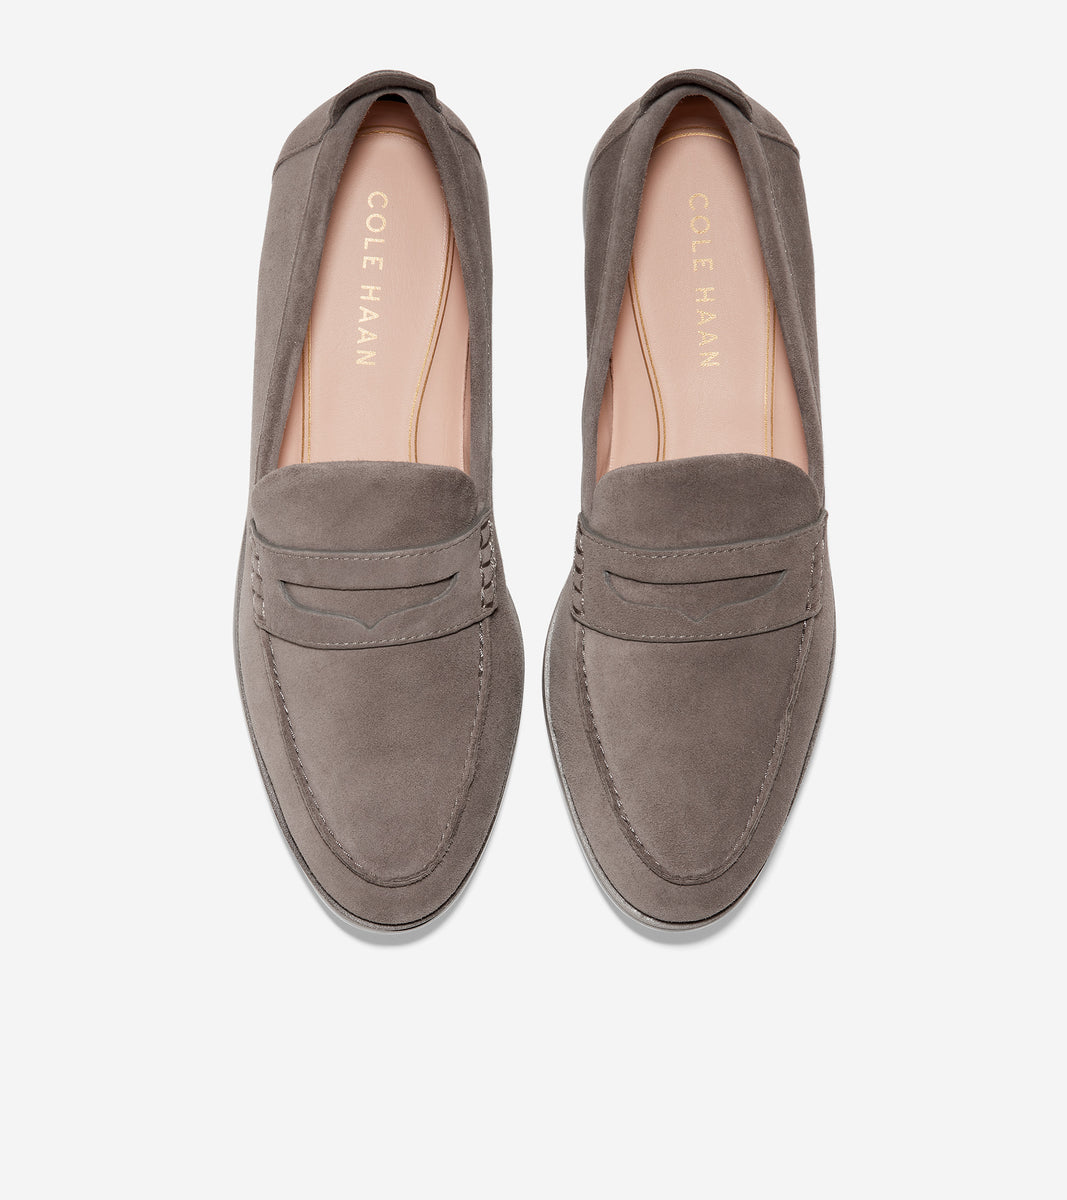 Women's Grand Ambition Tolly Penny Loafer